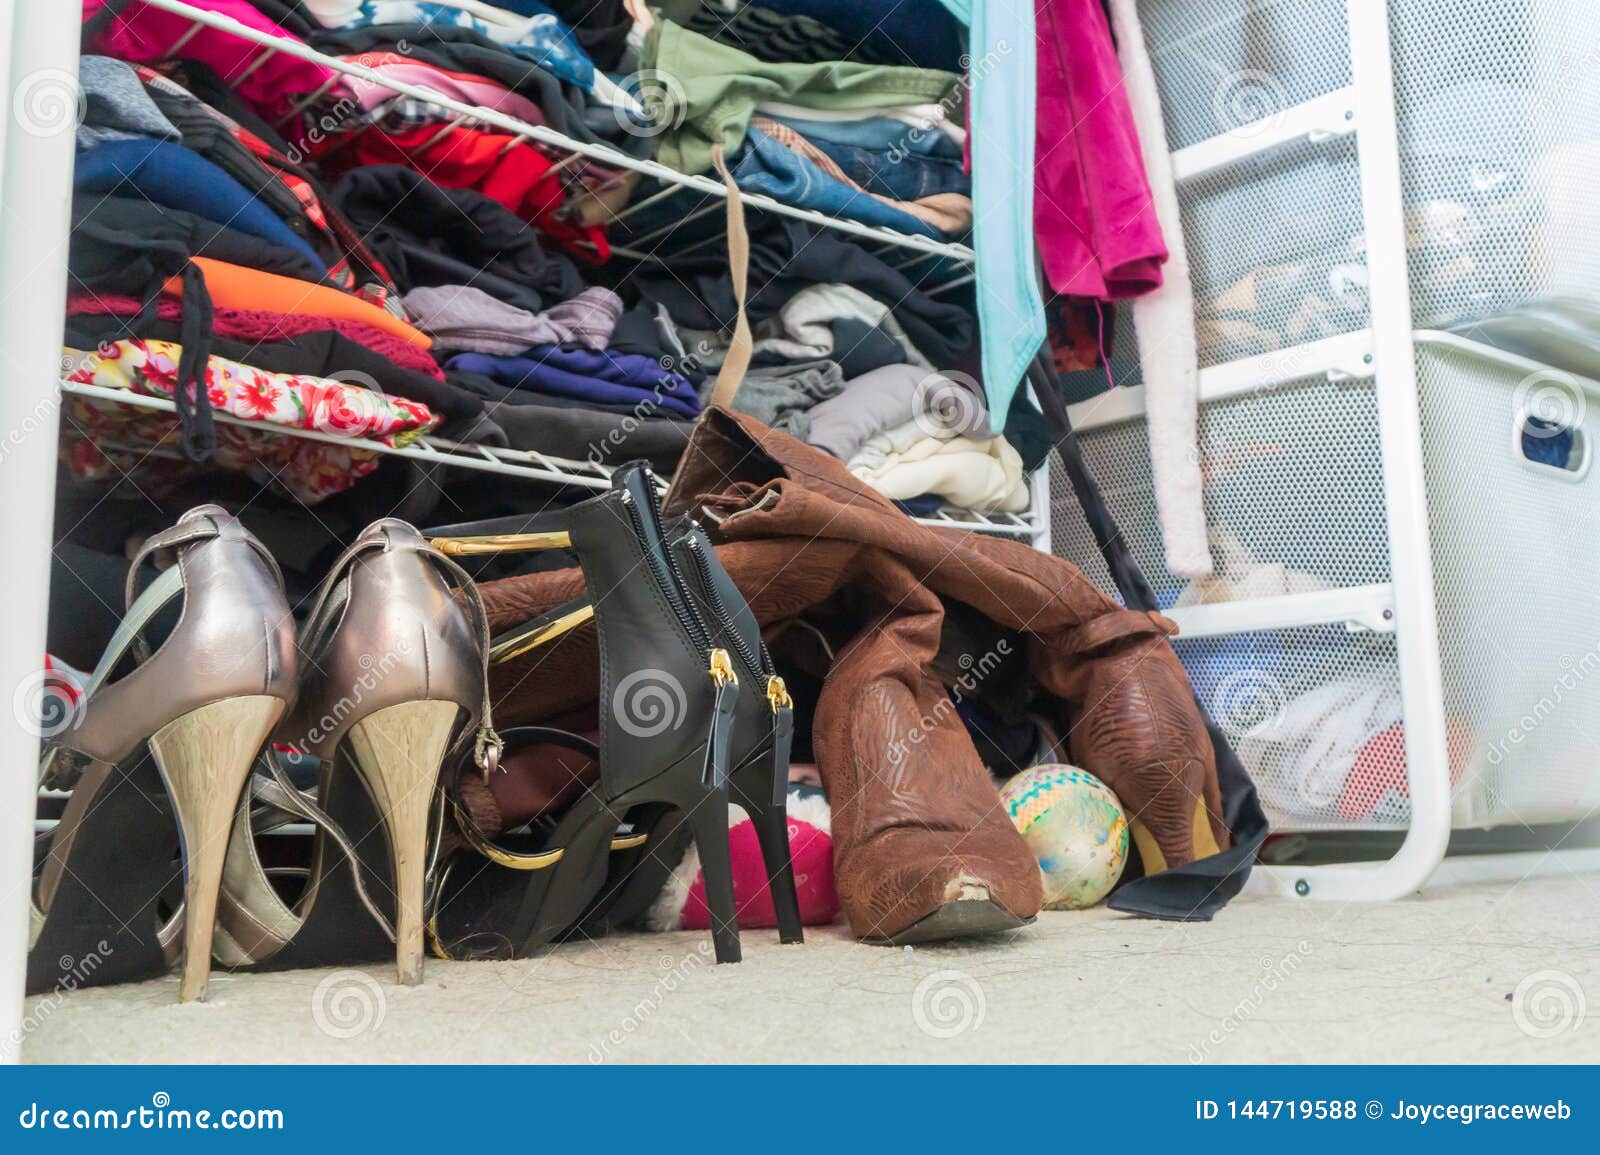 woman`s closet with high heel shoes, stacked, folded clothes on shelves and part of robes hanging. depicting closet organization,